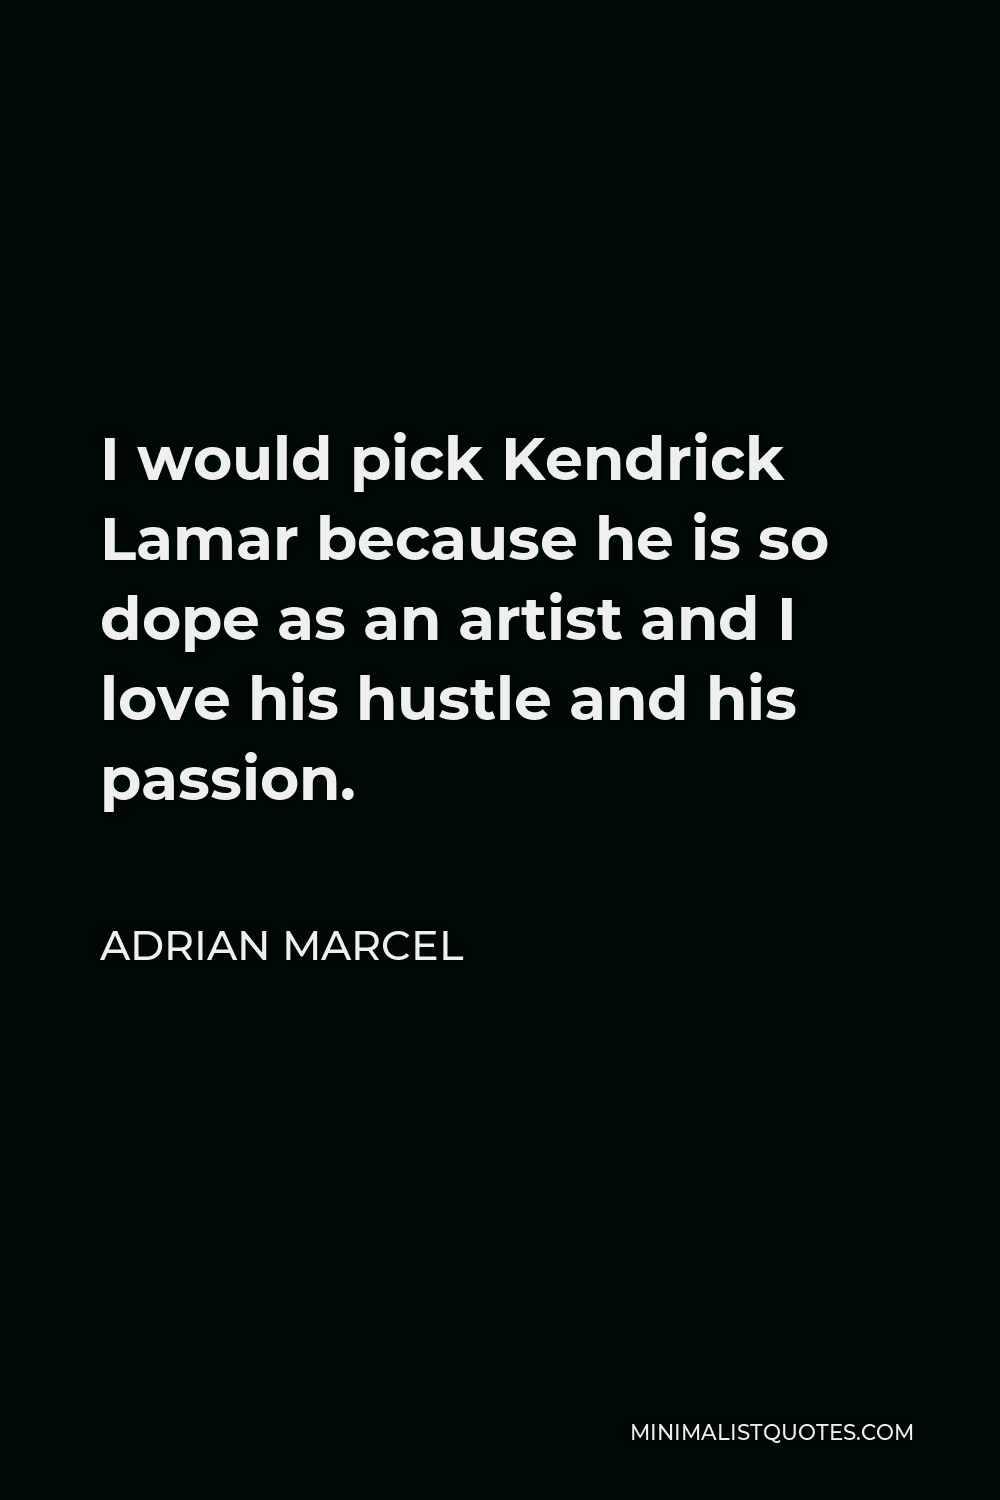 Adrian Marcel Quote - I would pick Kendrick Lamar because he is so dope as an artist and I love his hustle and his passion.